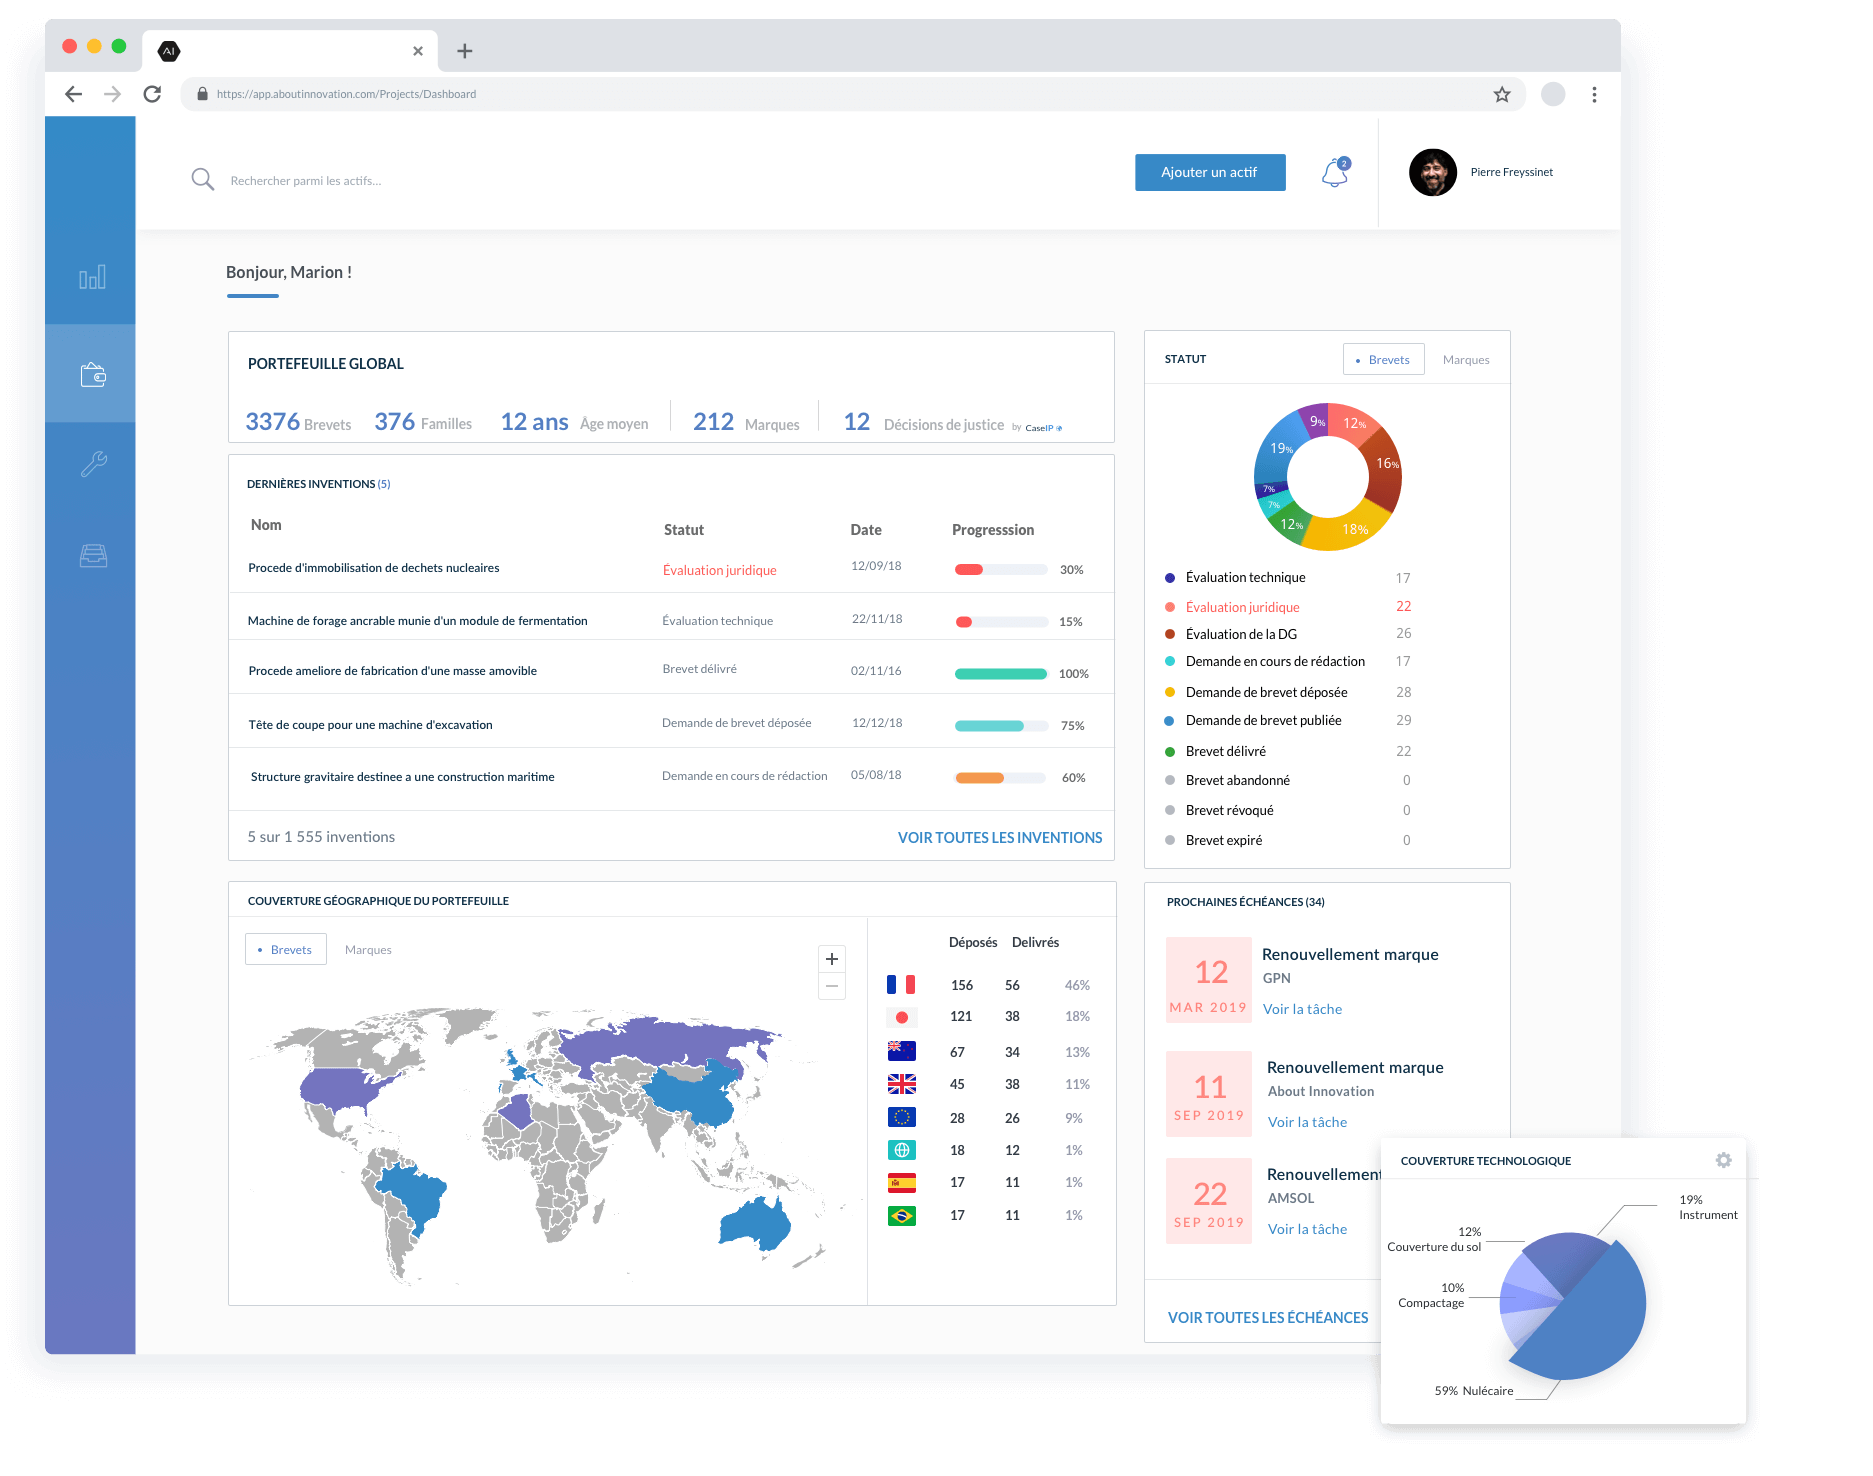 About innovation - Dashboard About Innovation